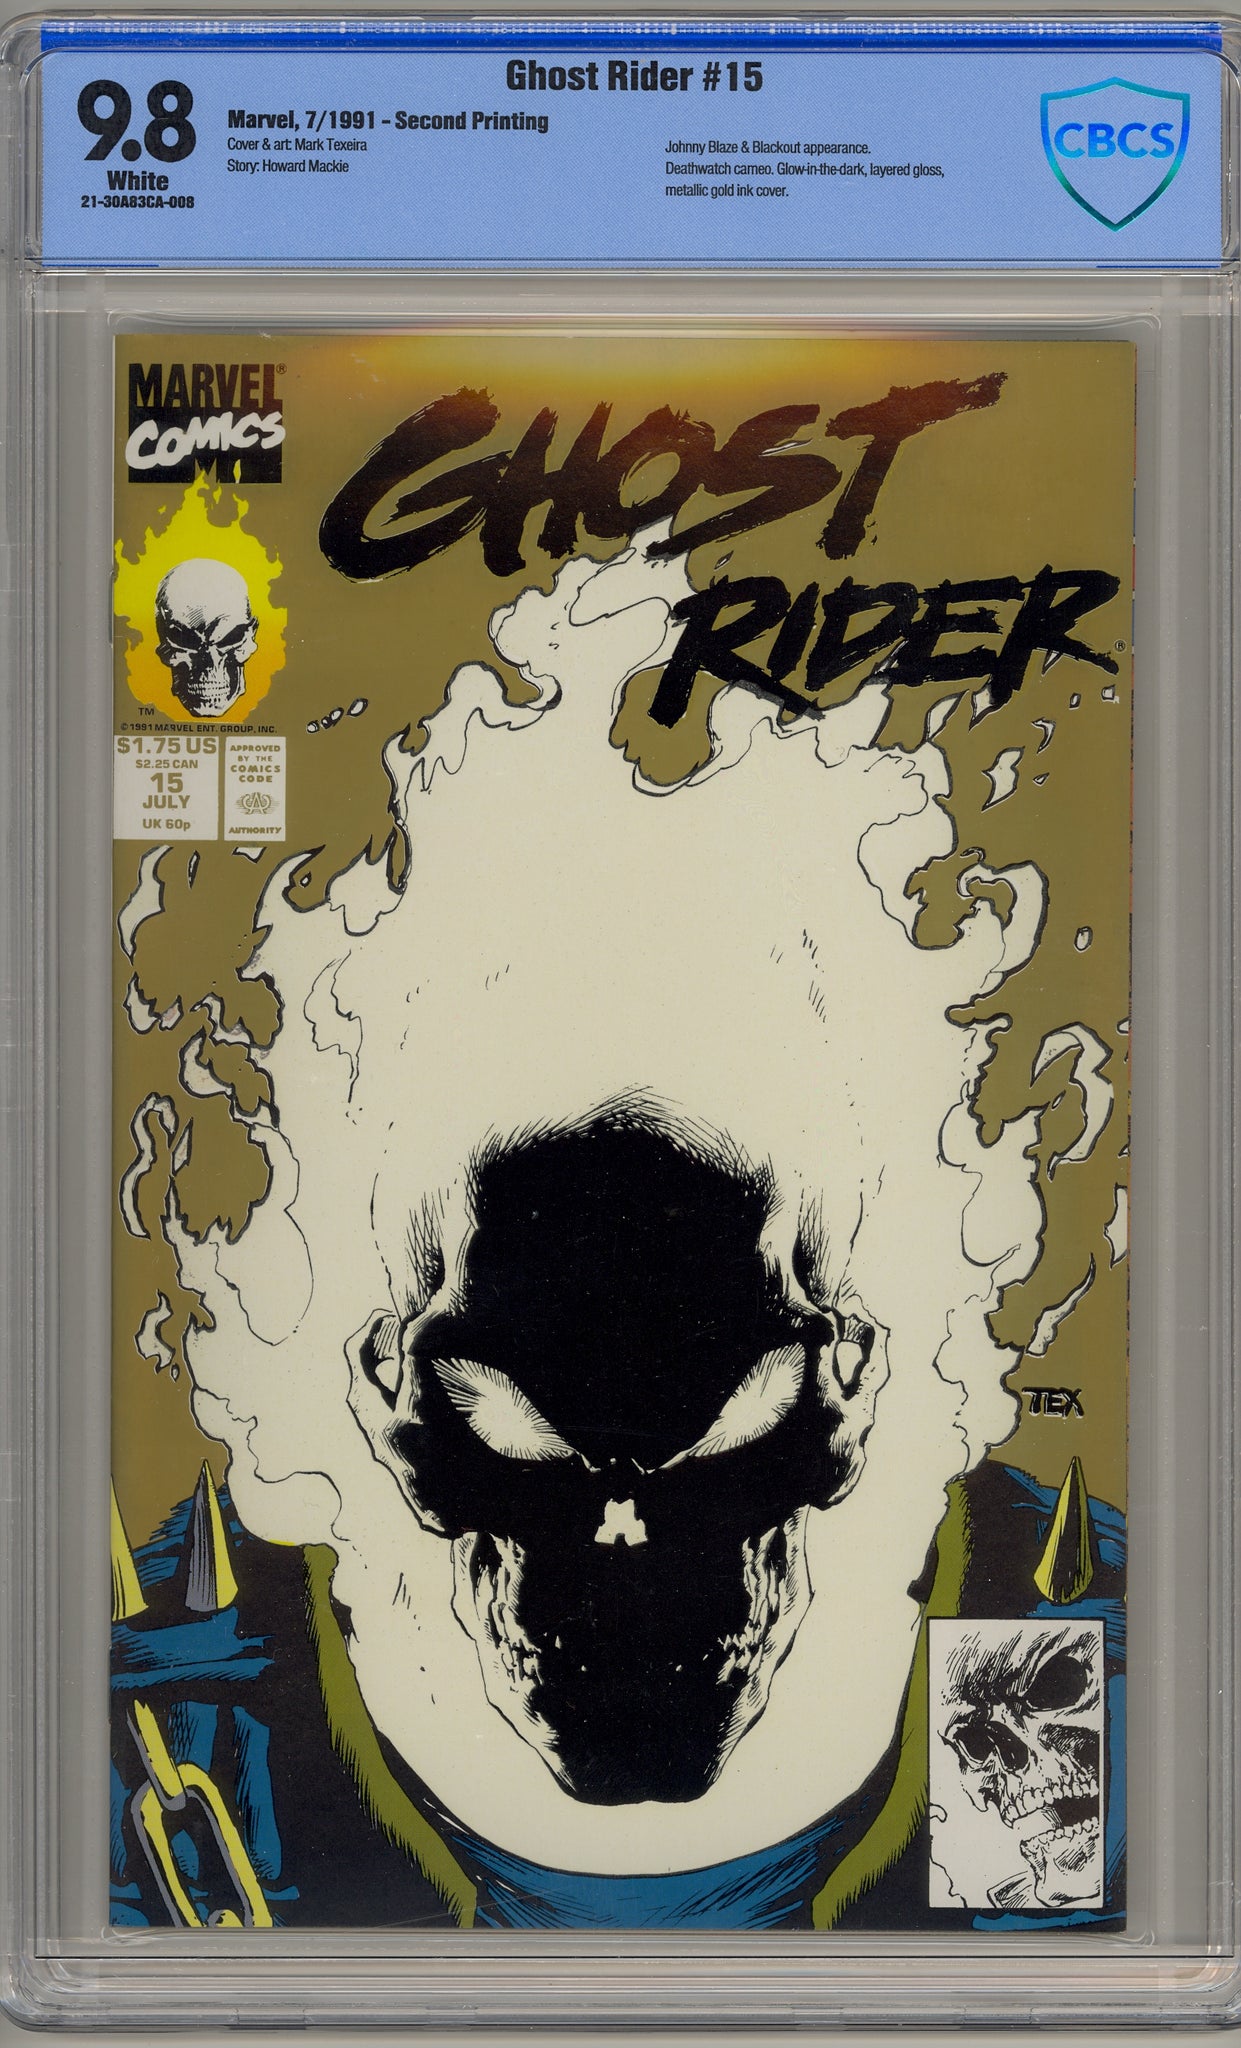 Ghost Rider #15 (1991) second printing gold variant